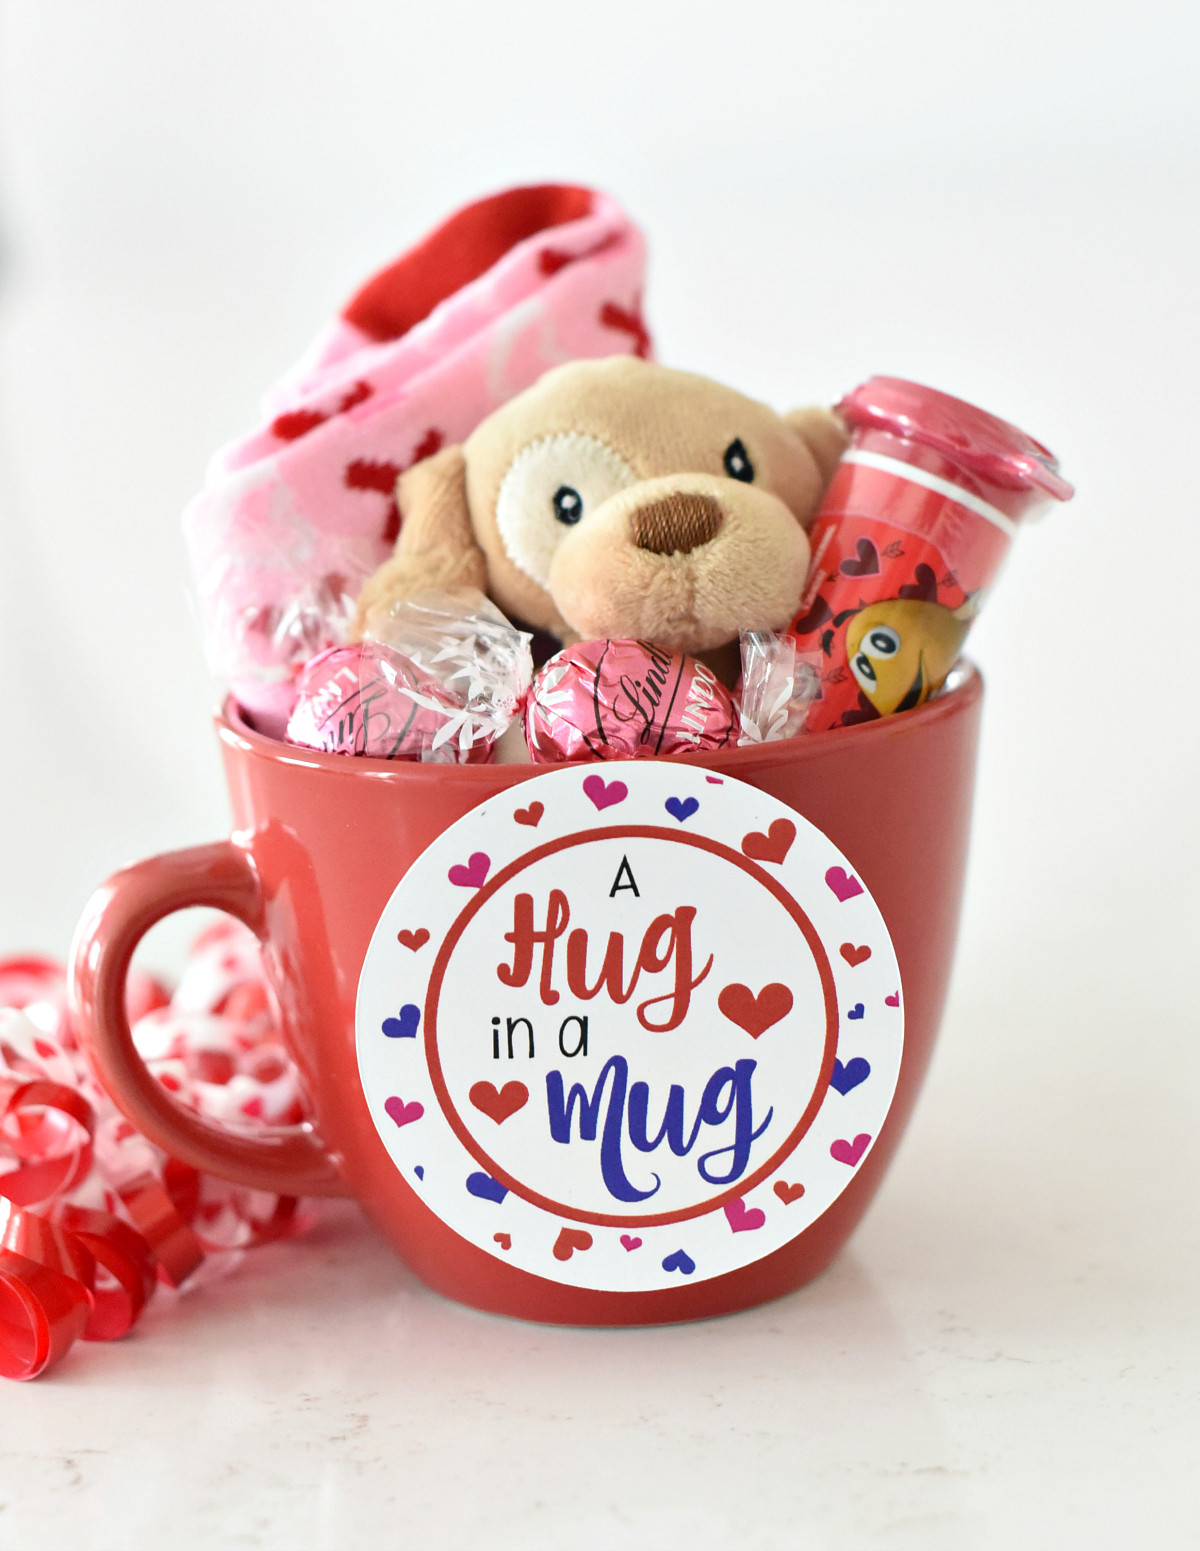 Valentines Gift Ideas For Toddlers
 Fun Valentines Gift Idea for Kids – Fun Squared